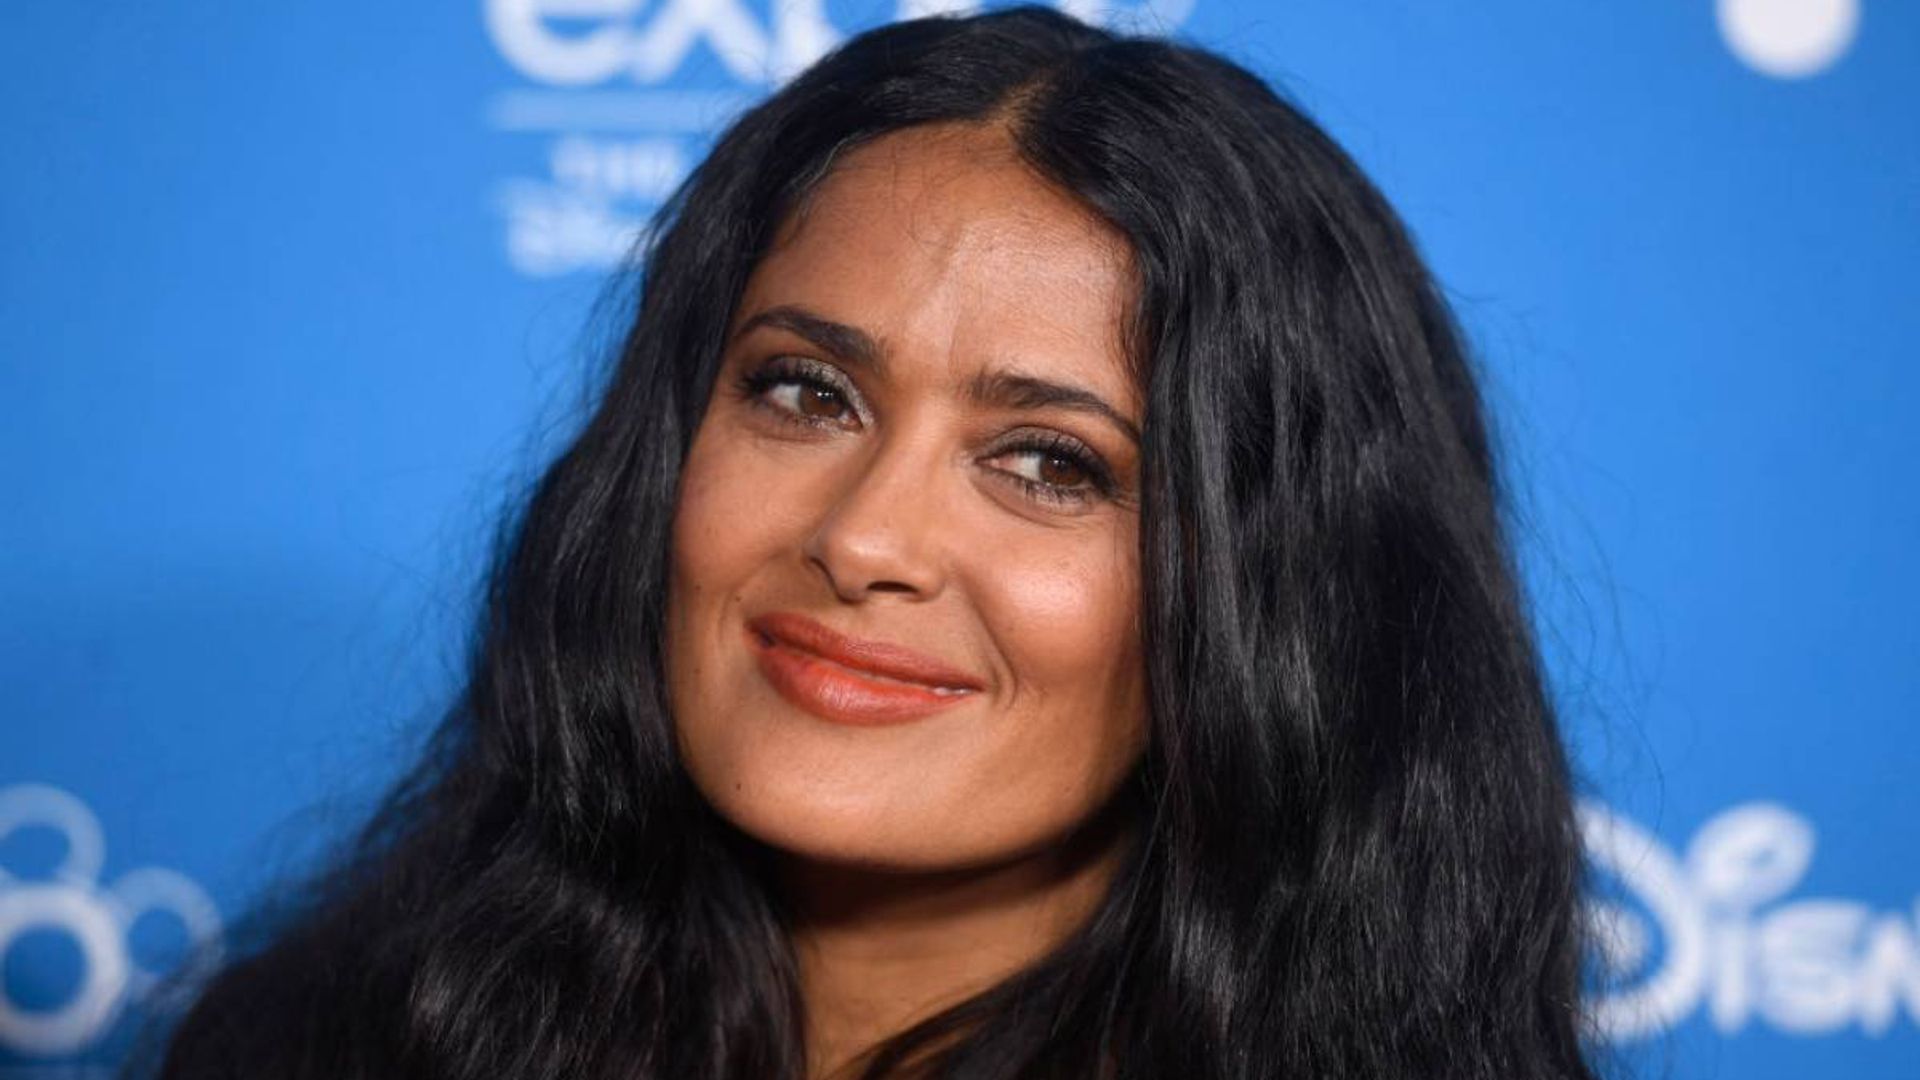 Salma Hayek shows off her toned abs in throwback photo which divides fans